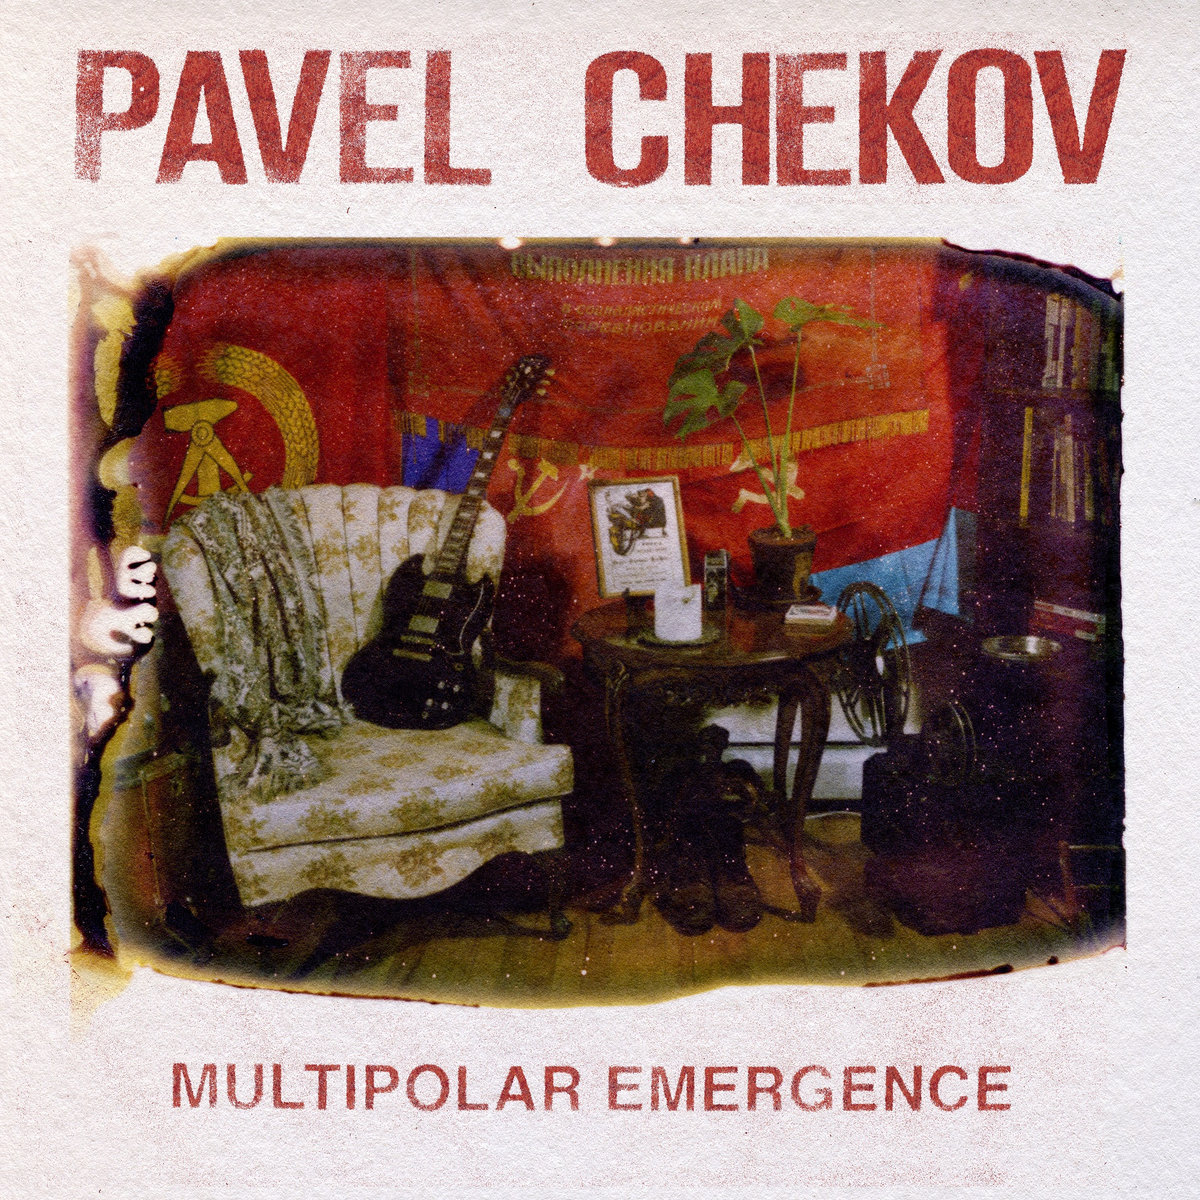 If you like muddy, dirt-covered grindviolence in the same vein as Triac, then you need to check out Pavel Chekov. decibelmagazine.com/2024/05/21/bla… #PavelChekov #grindcore #blastworship